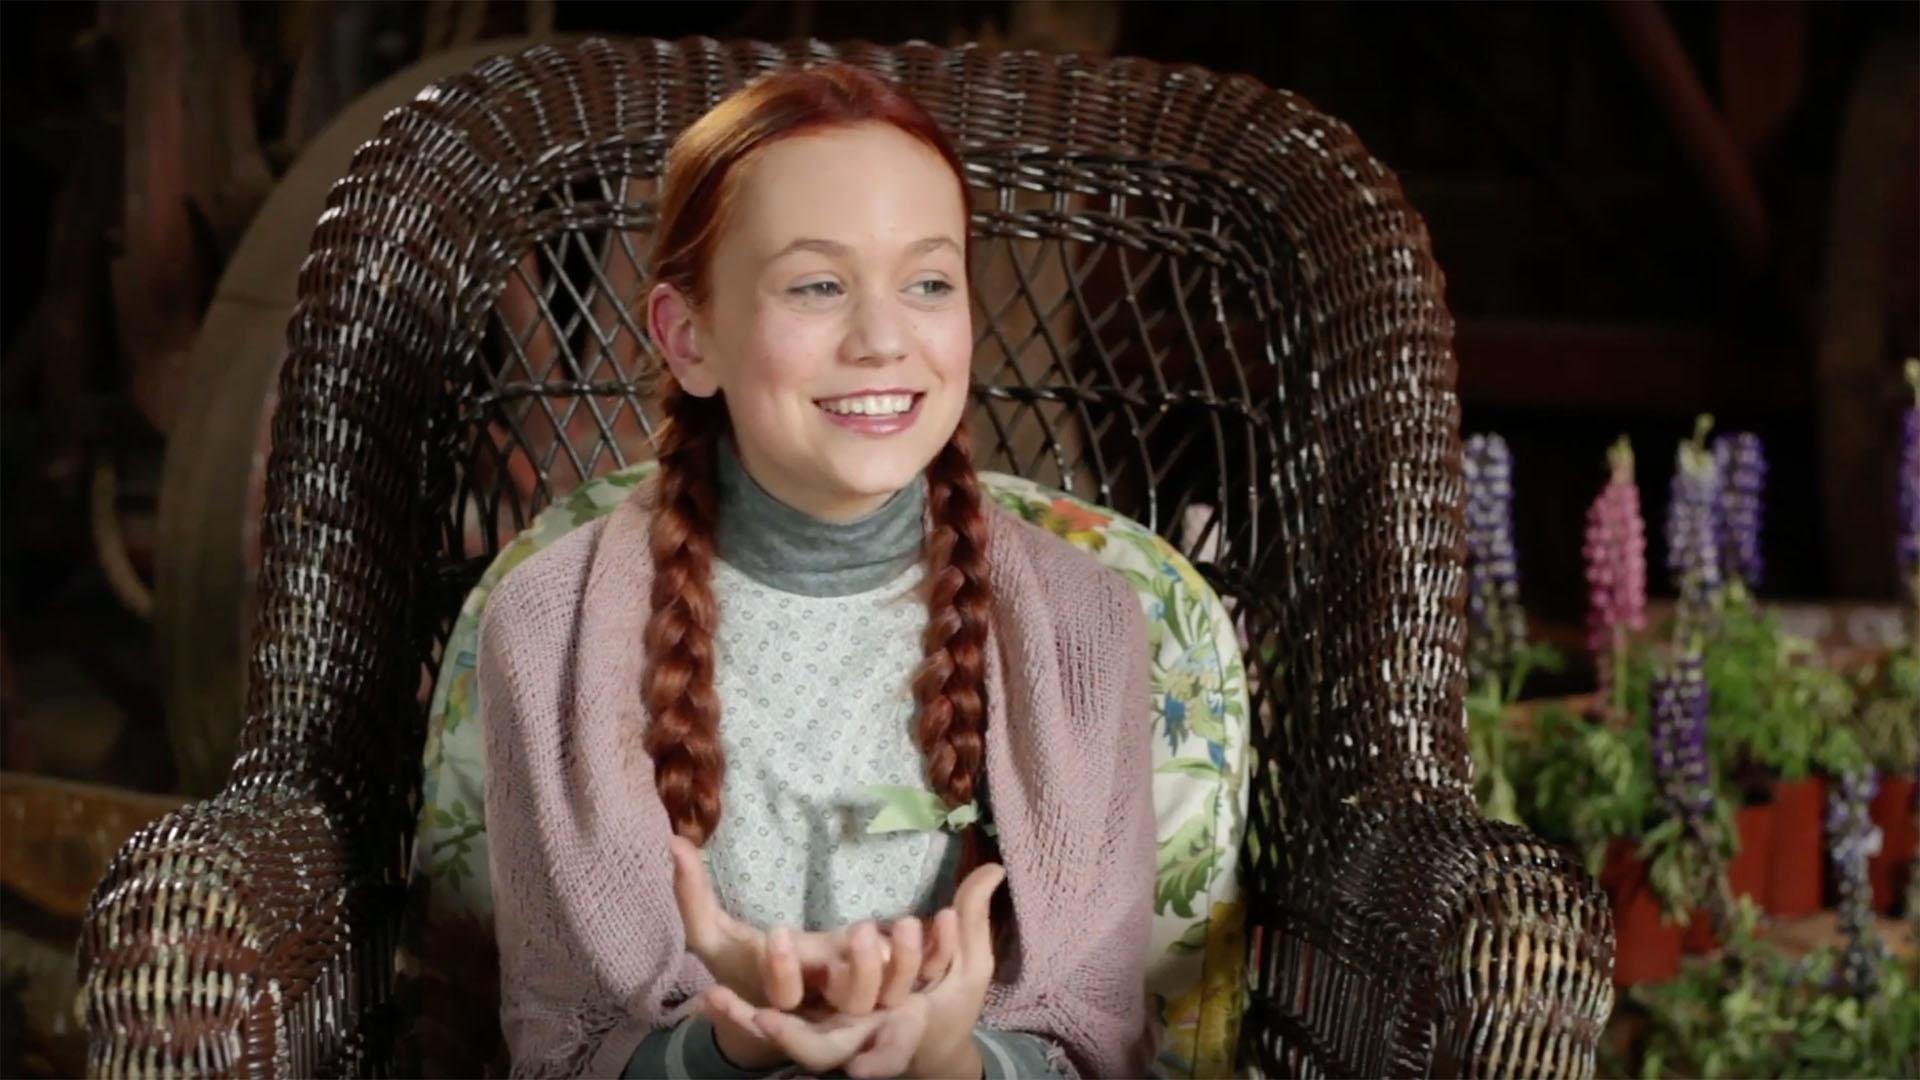 anne-of-green-gables-cast-interviews-twin-cities-pbs